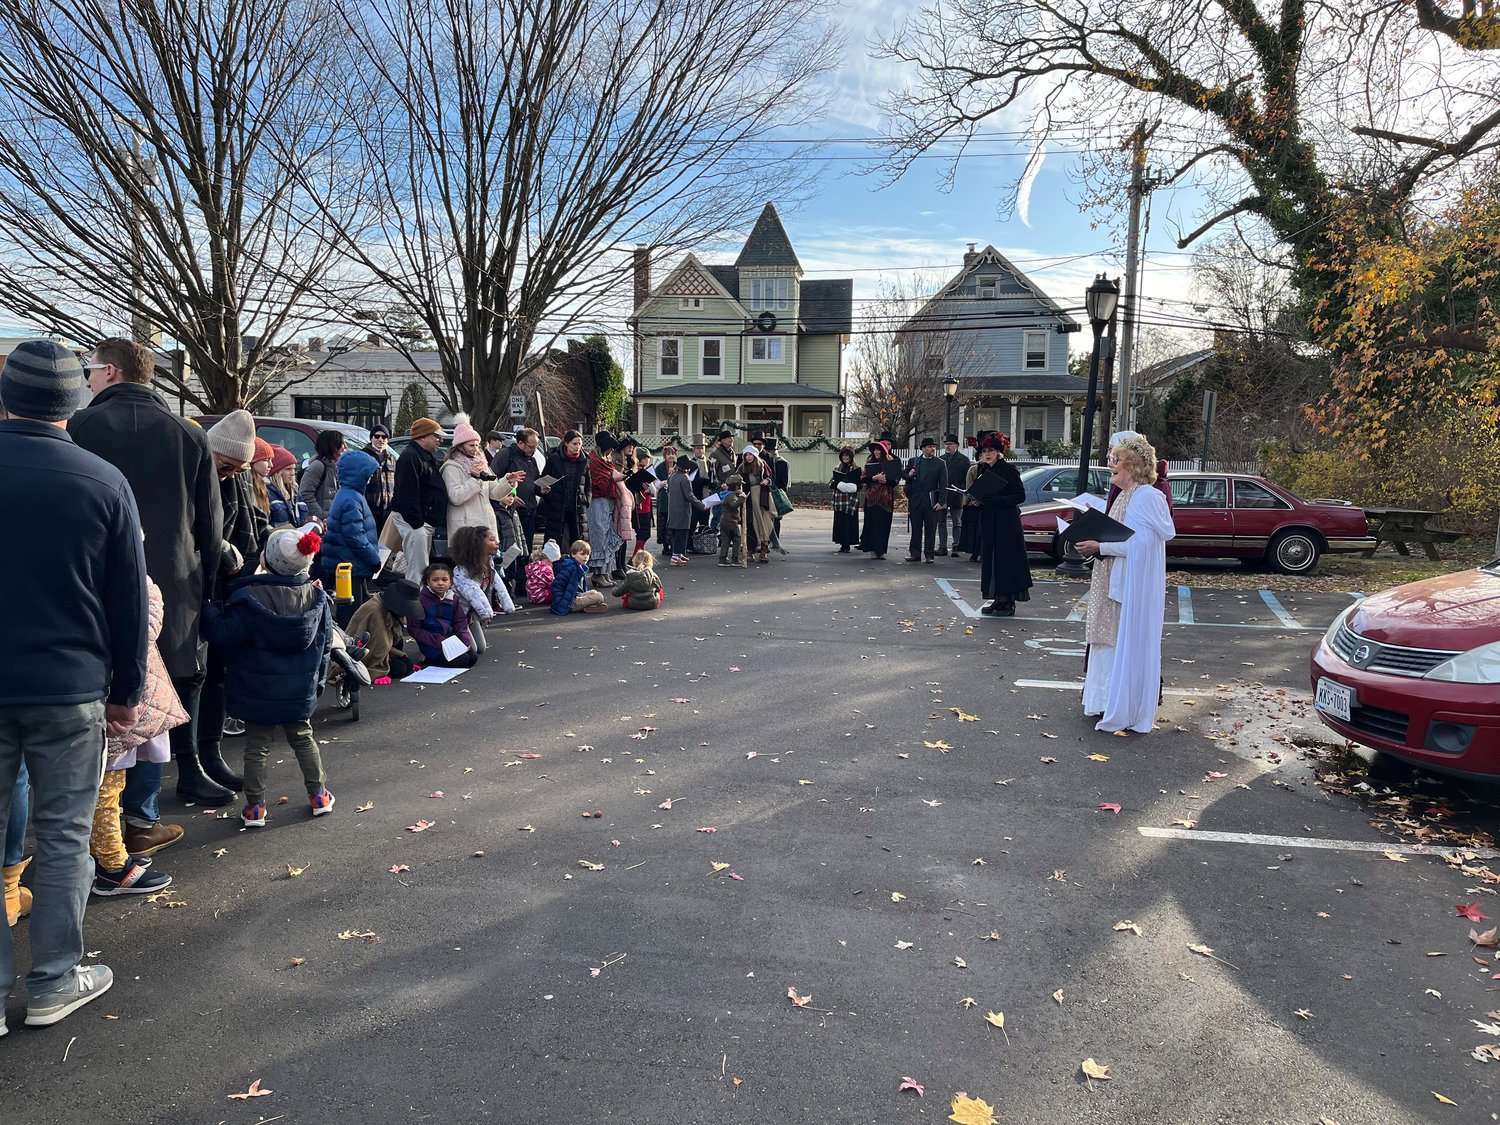 Through the power of imagination, a parking lot became Scrooge’s childhood boarding school during ‘A Christmas Carol,’ performed by members of the Sea Cliff Civic Association.